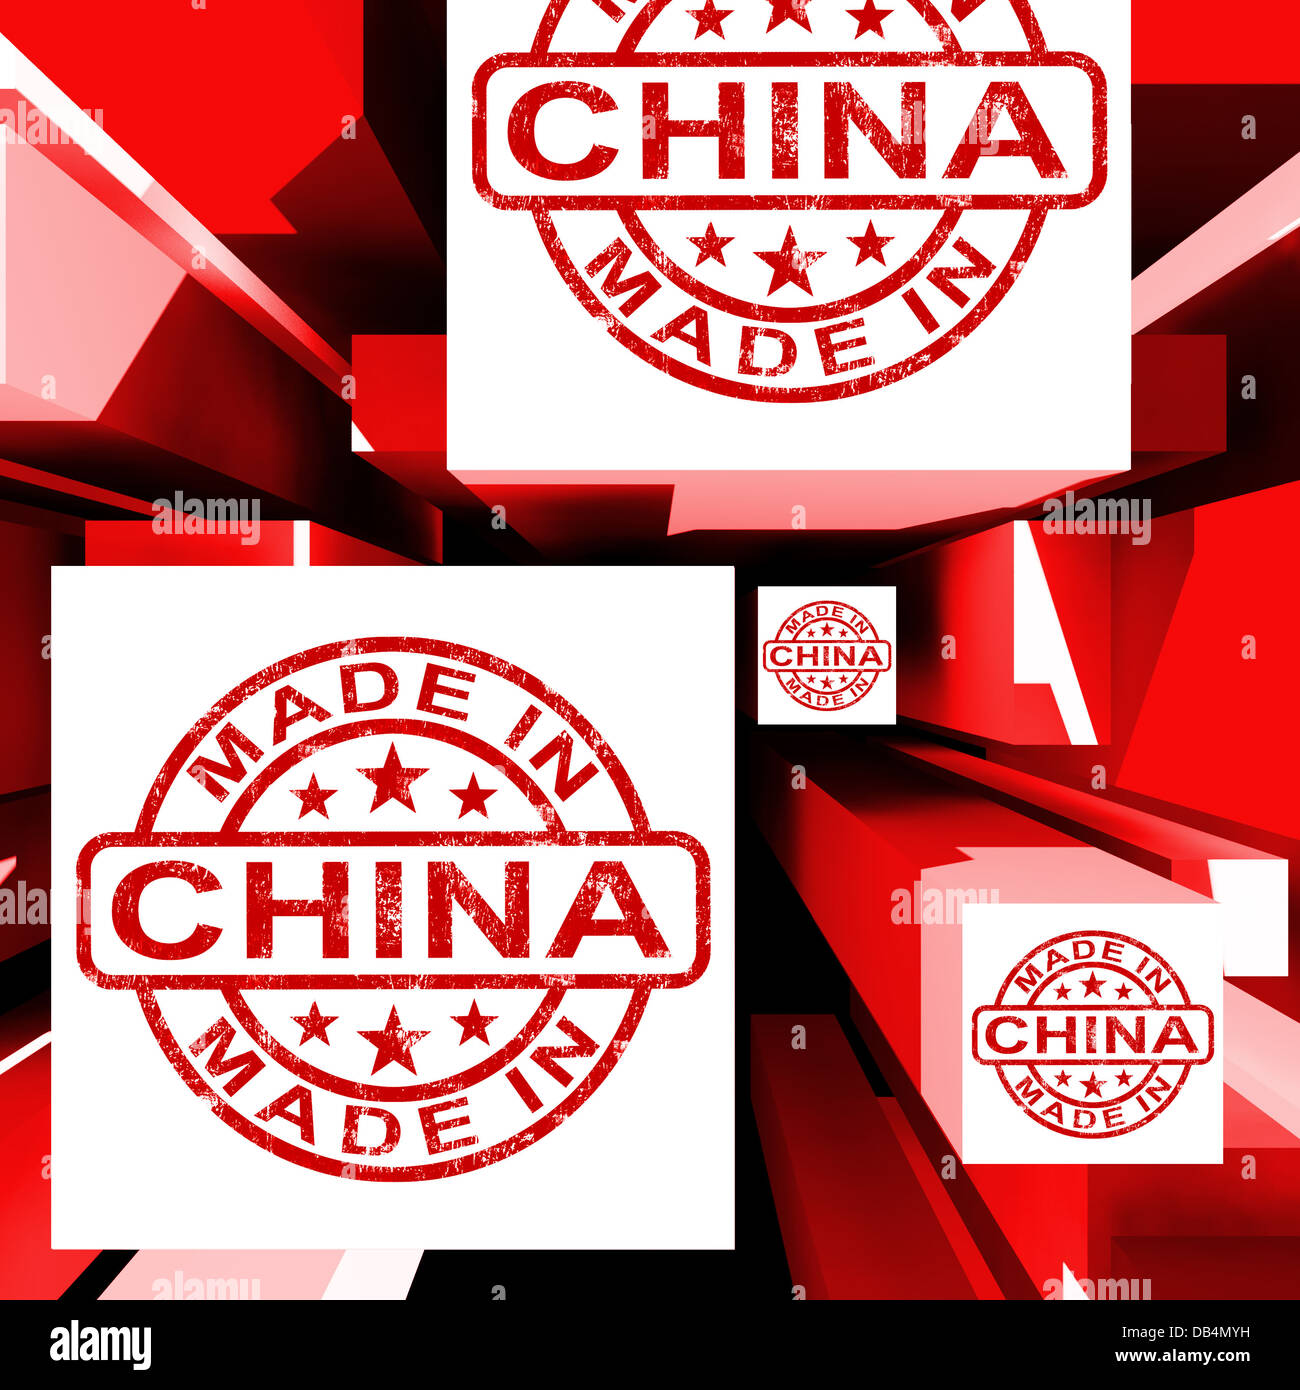 https://c8.alamy.com/comp/DB4MYH/made-in-china-on-cubes-showing-chinese-products-DB4MYH.jpg